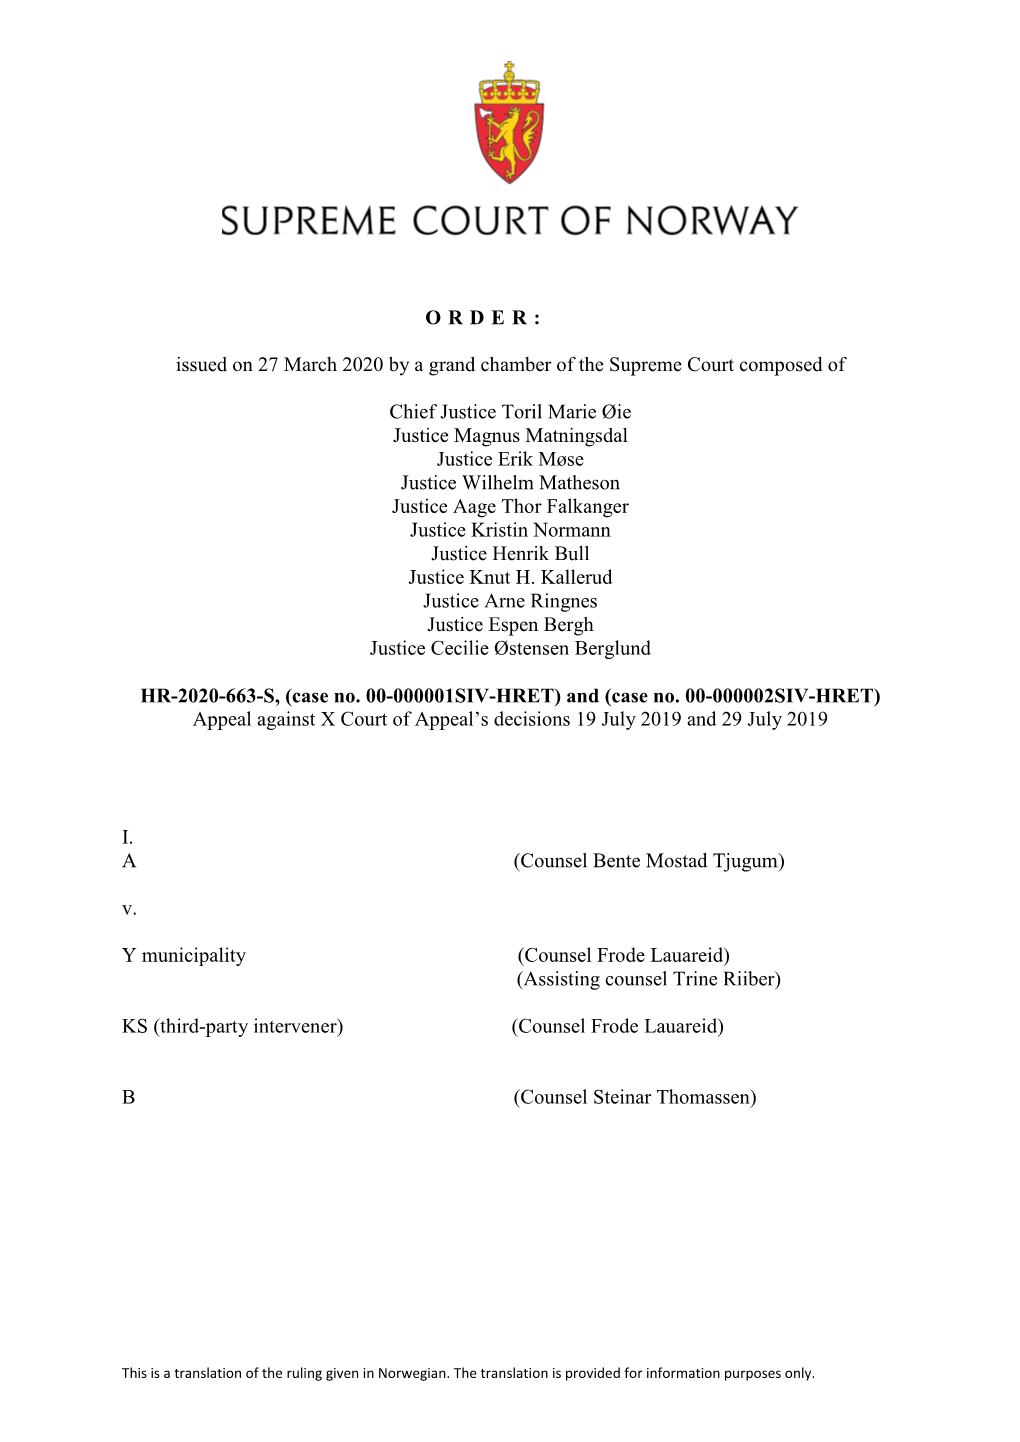 ORDER: Issued on 27 March 2020 by a Grand Chamber of the Supreme